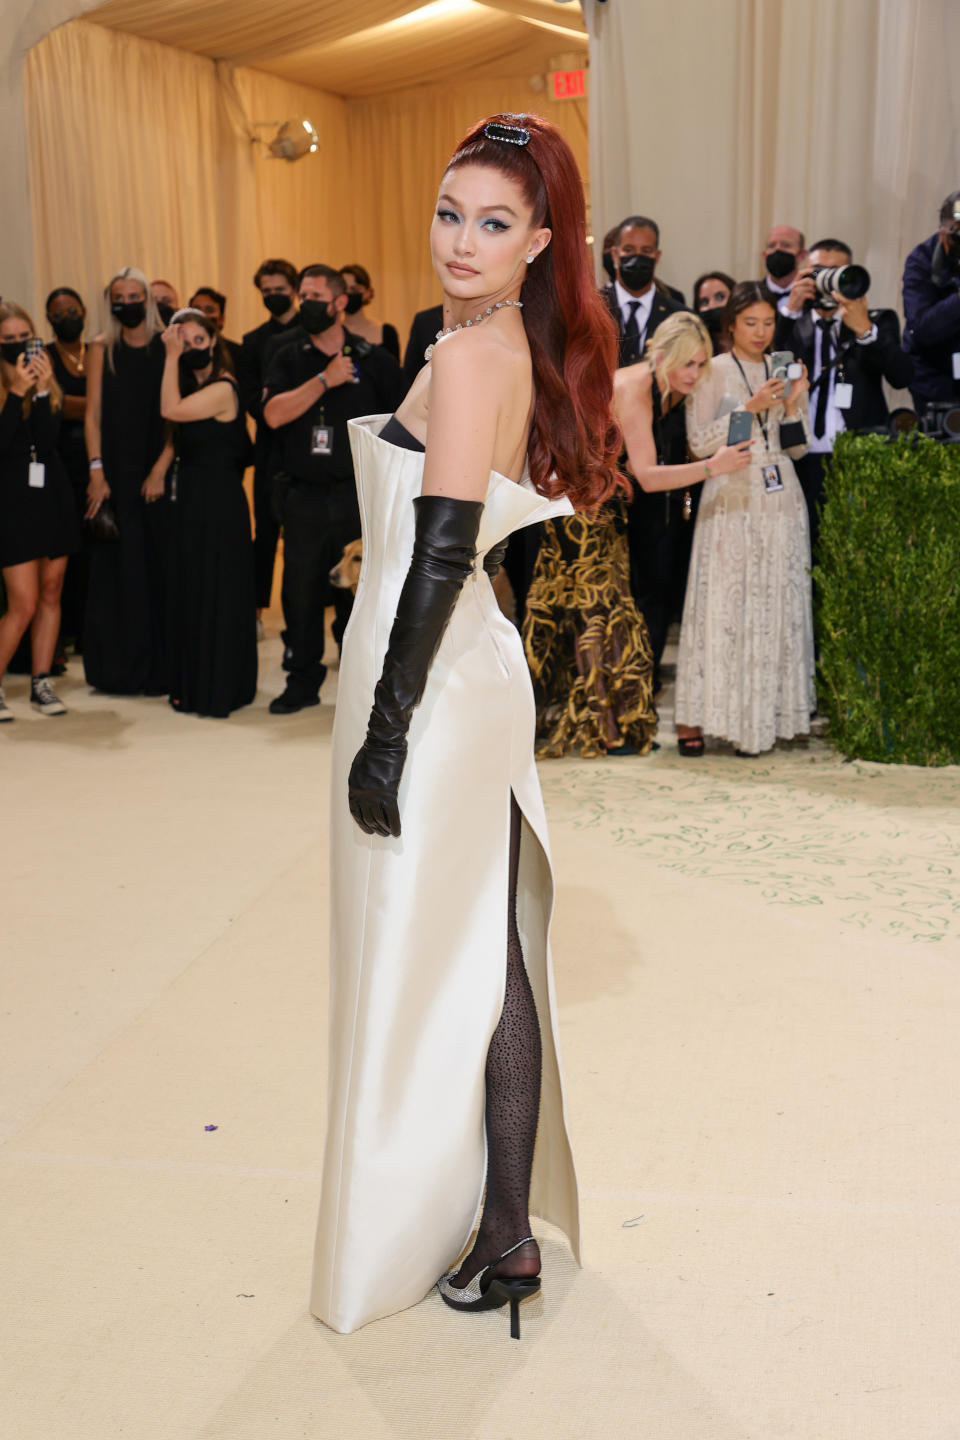 Gigi Hadid attends The 2021 Met Gala Celebrating In America: A Lexicon Of Fashion at Metropolitan Museum of Art on September 13, 2021 in New York City. (Getty Images)